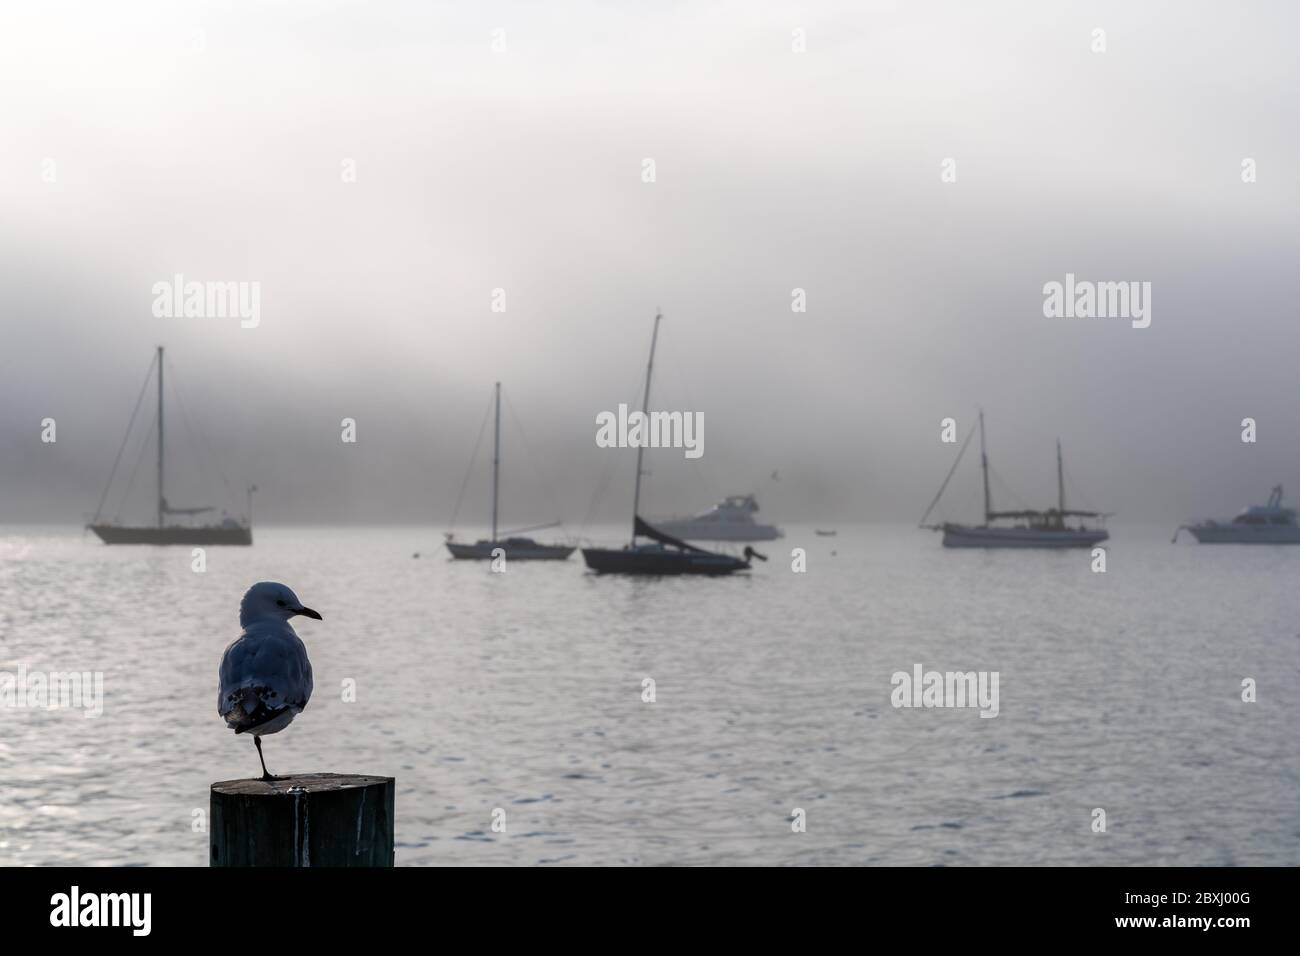 Silhouette of Seagull seeing at the sea with surround mist in background at Akarou Harbor, Canterbury, New Zealand. Stock Photo